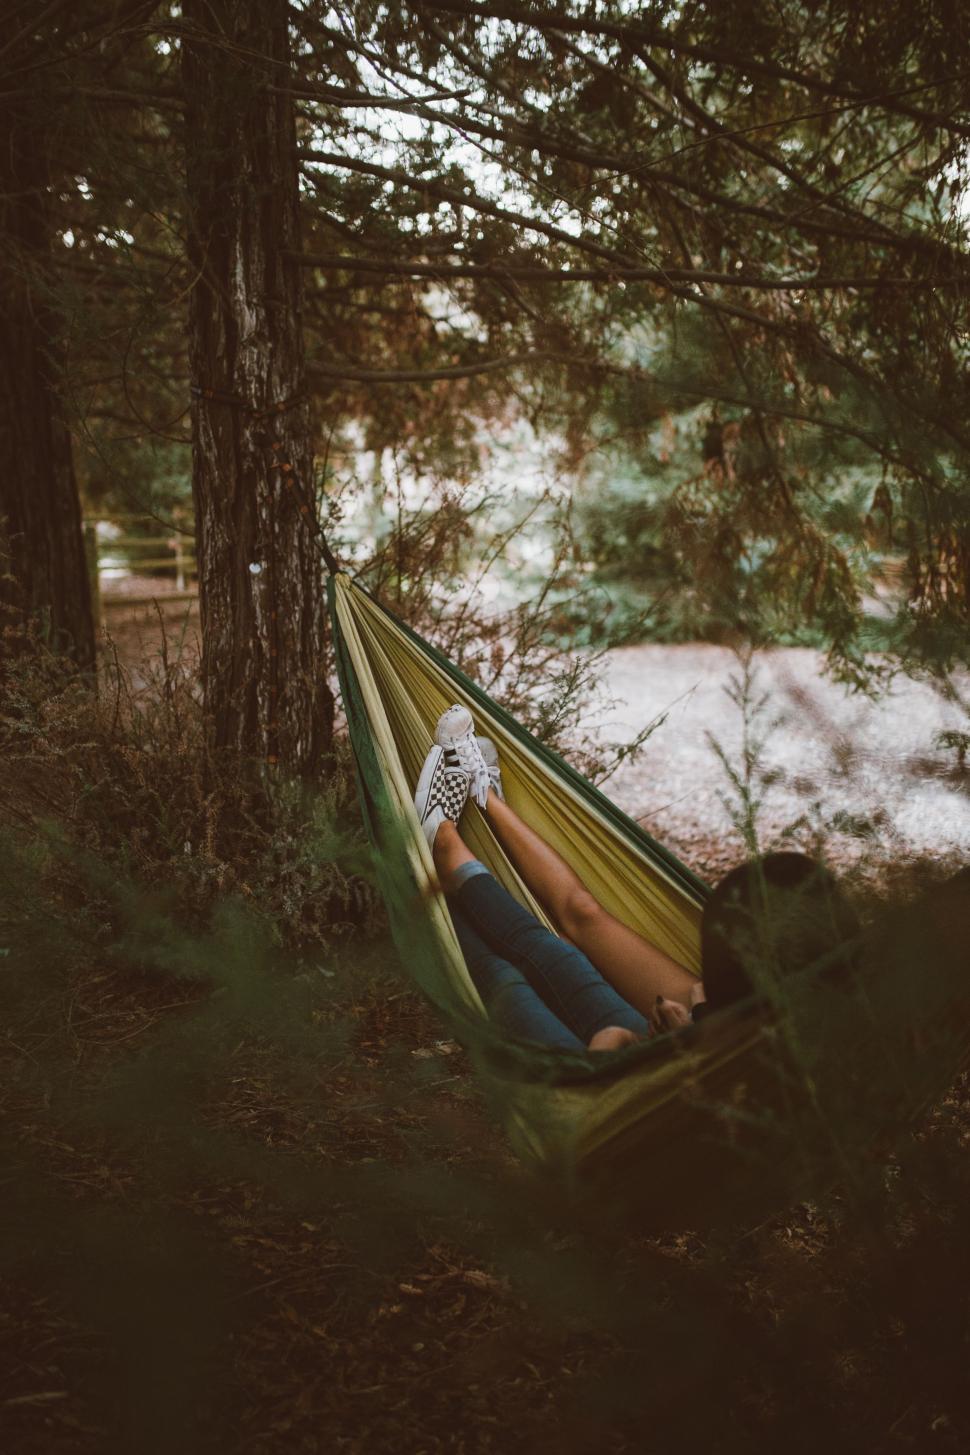 Free Image of Person Relaxing in Hammock in Wooded Area 